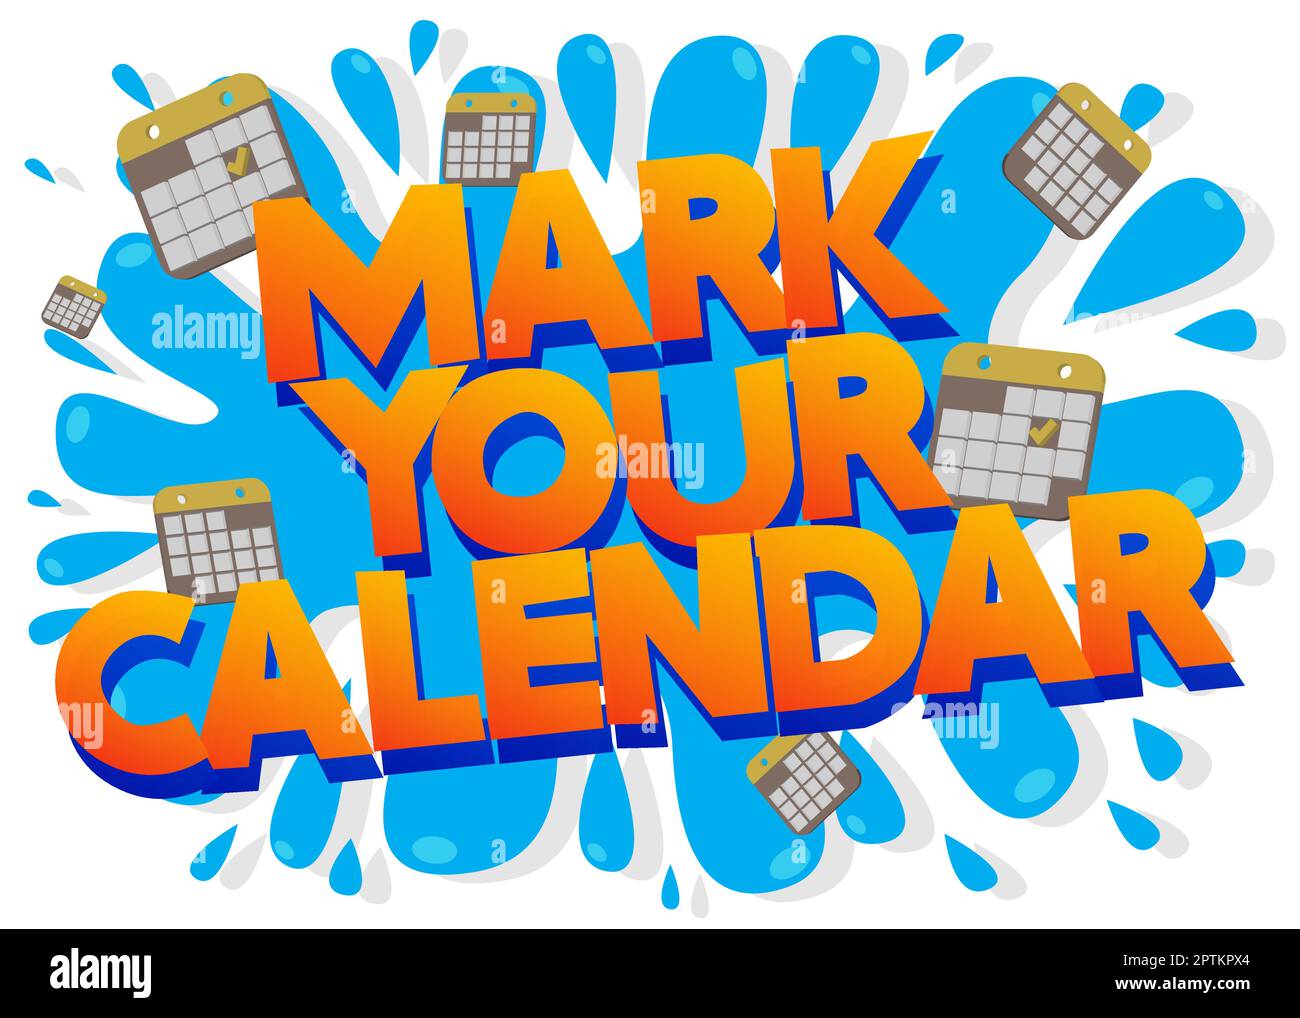 Mark Your Calendar. Word written with Children's font in cartoon style